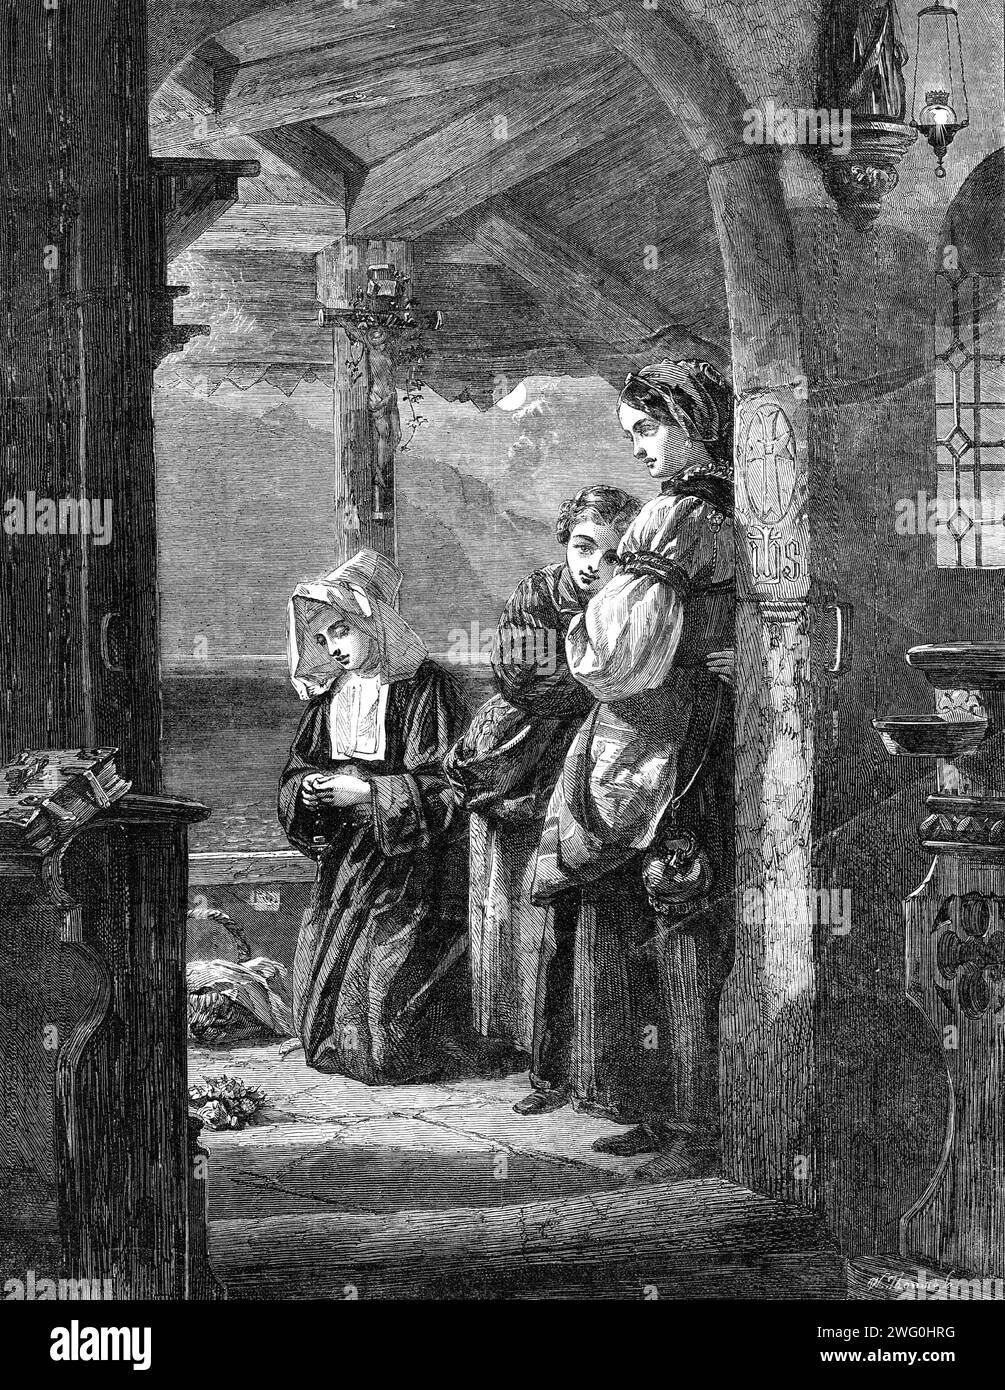 &quot;The Convent Shrine&quot; by Frank Wyburd, in the Gallery of the British Institution, 1862. Engraving of a painting. 'This is a charming and picturesque little composition, imbued with that pious and romantic character which Mr, Wyburd loves to deal with. In an ancient convent of rude structure a nun is kneeling, telling her beads before the shrine of a saint; two other young females, whose faces denote a reverential and serious turn of thought, completing the group. &quot;And the hymn of the nuns was heard the while, Sung low in the dim, mysterious aisle&quot;. The shrine is lighted by a Stock Photo